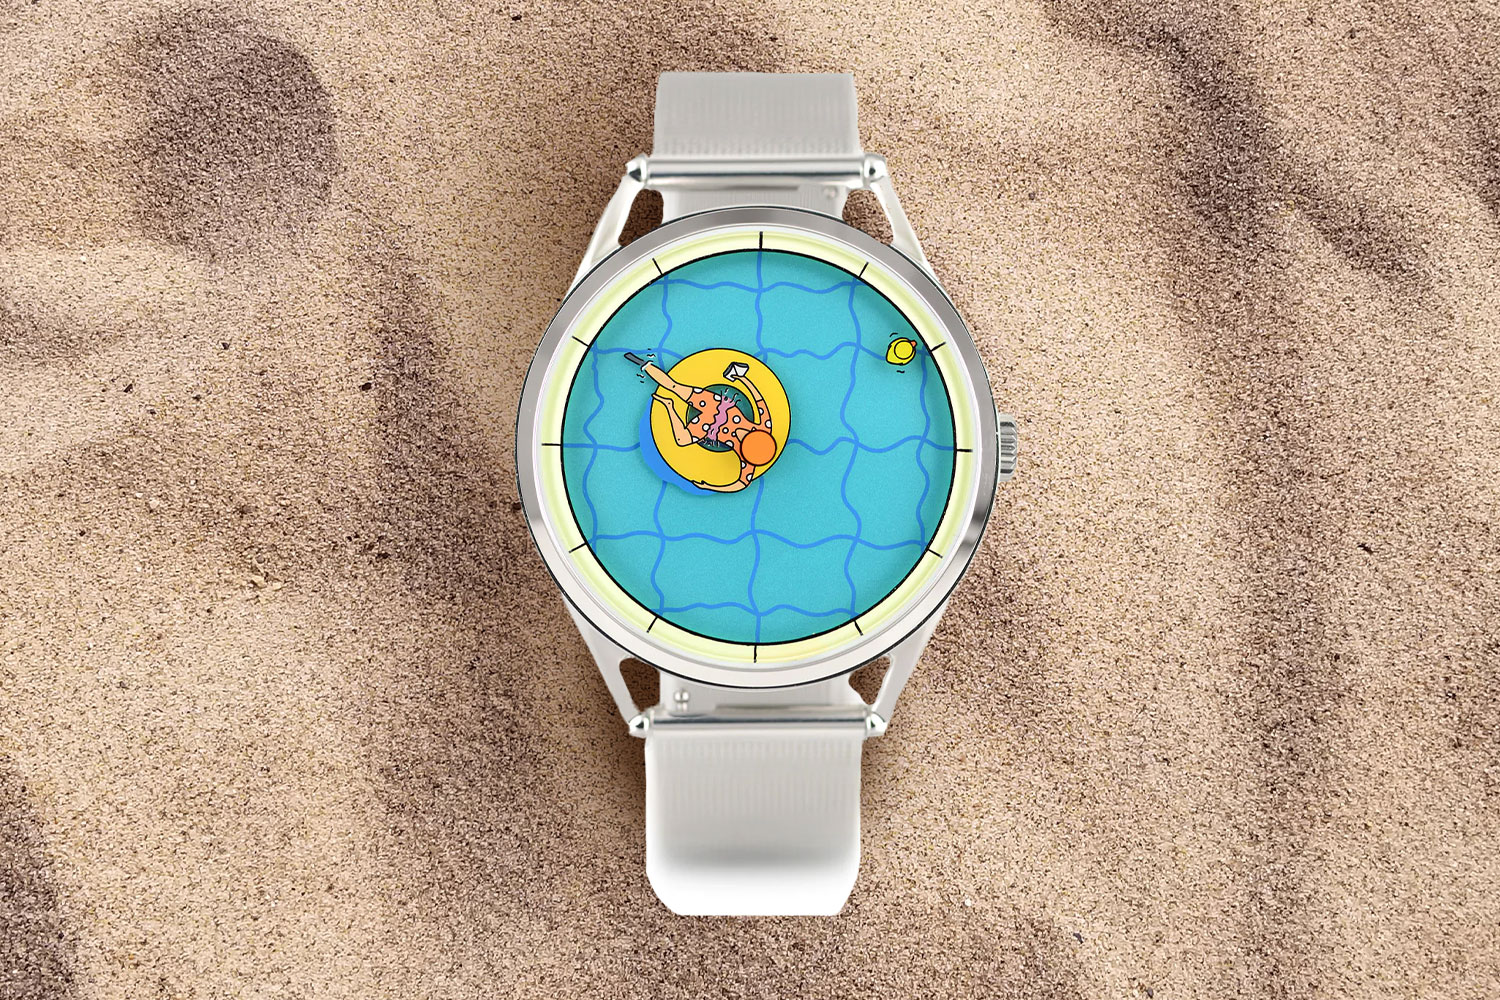 watch in the sand with a person floating in the tube as an arrow hand.